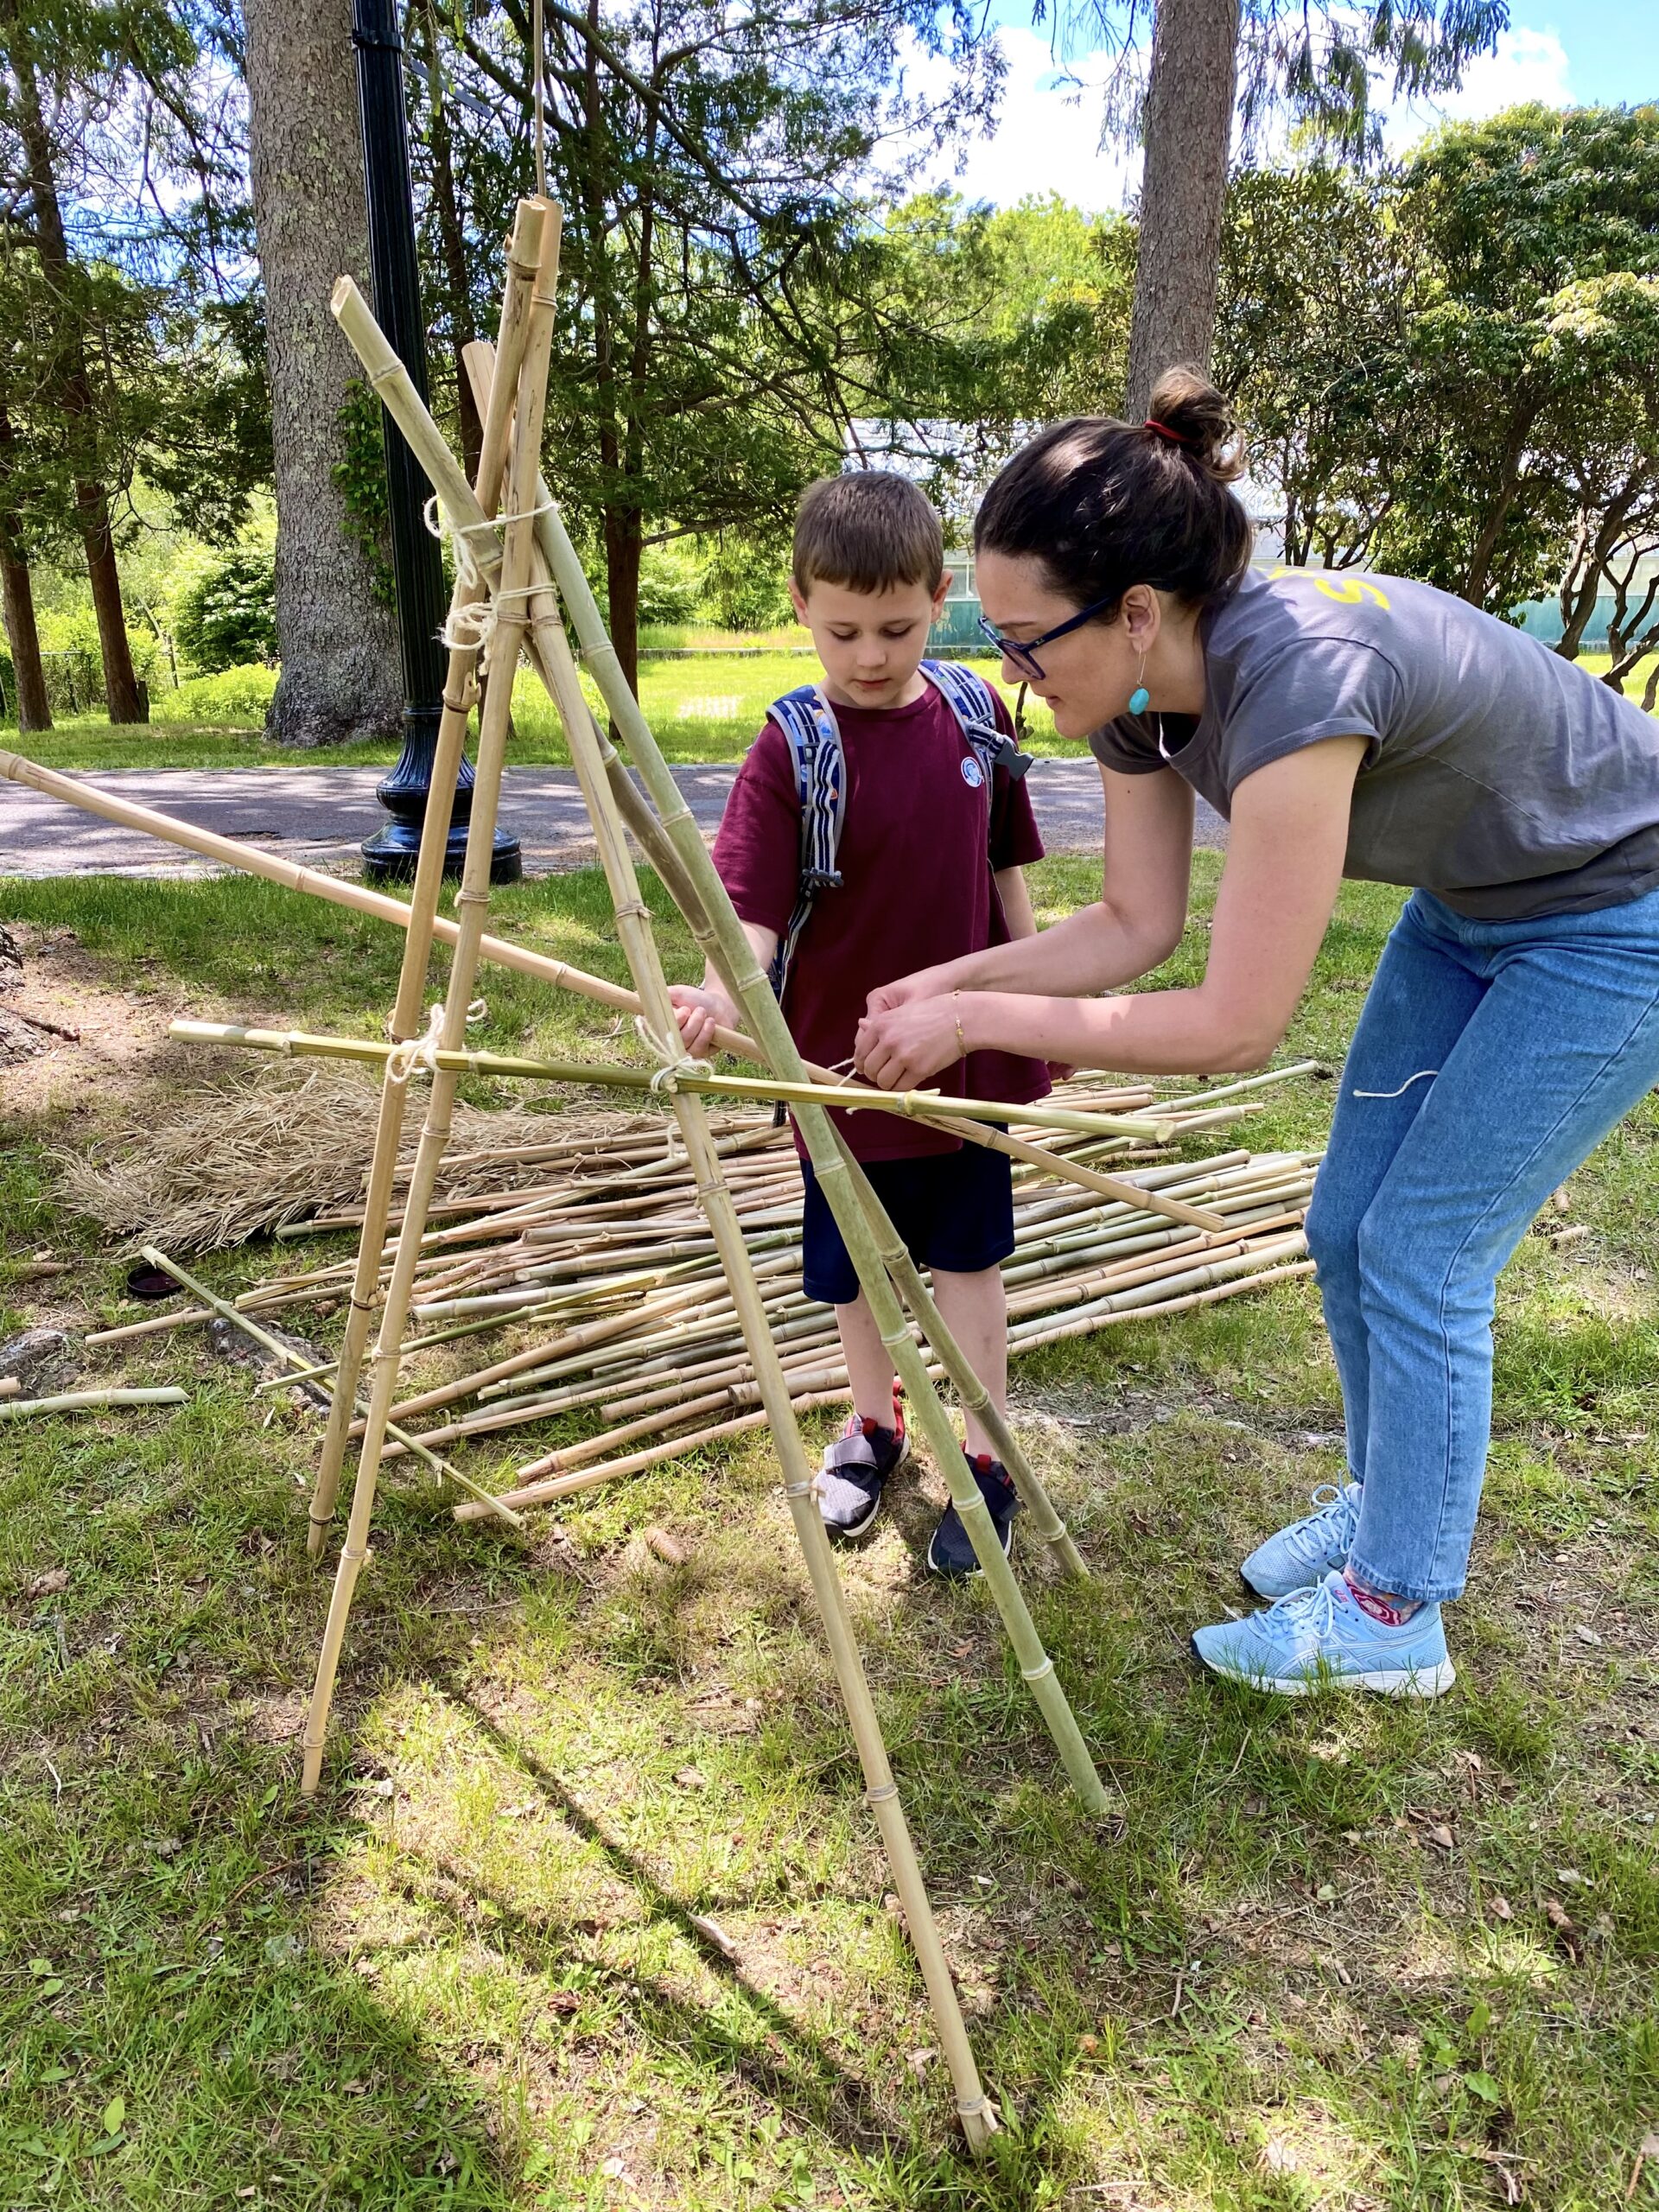 An adult and child work together to build a structure made of bamboo